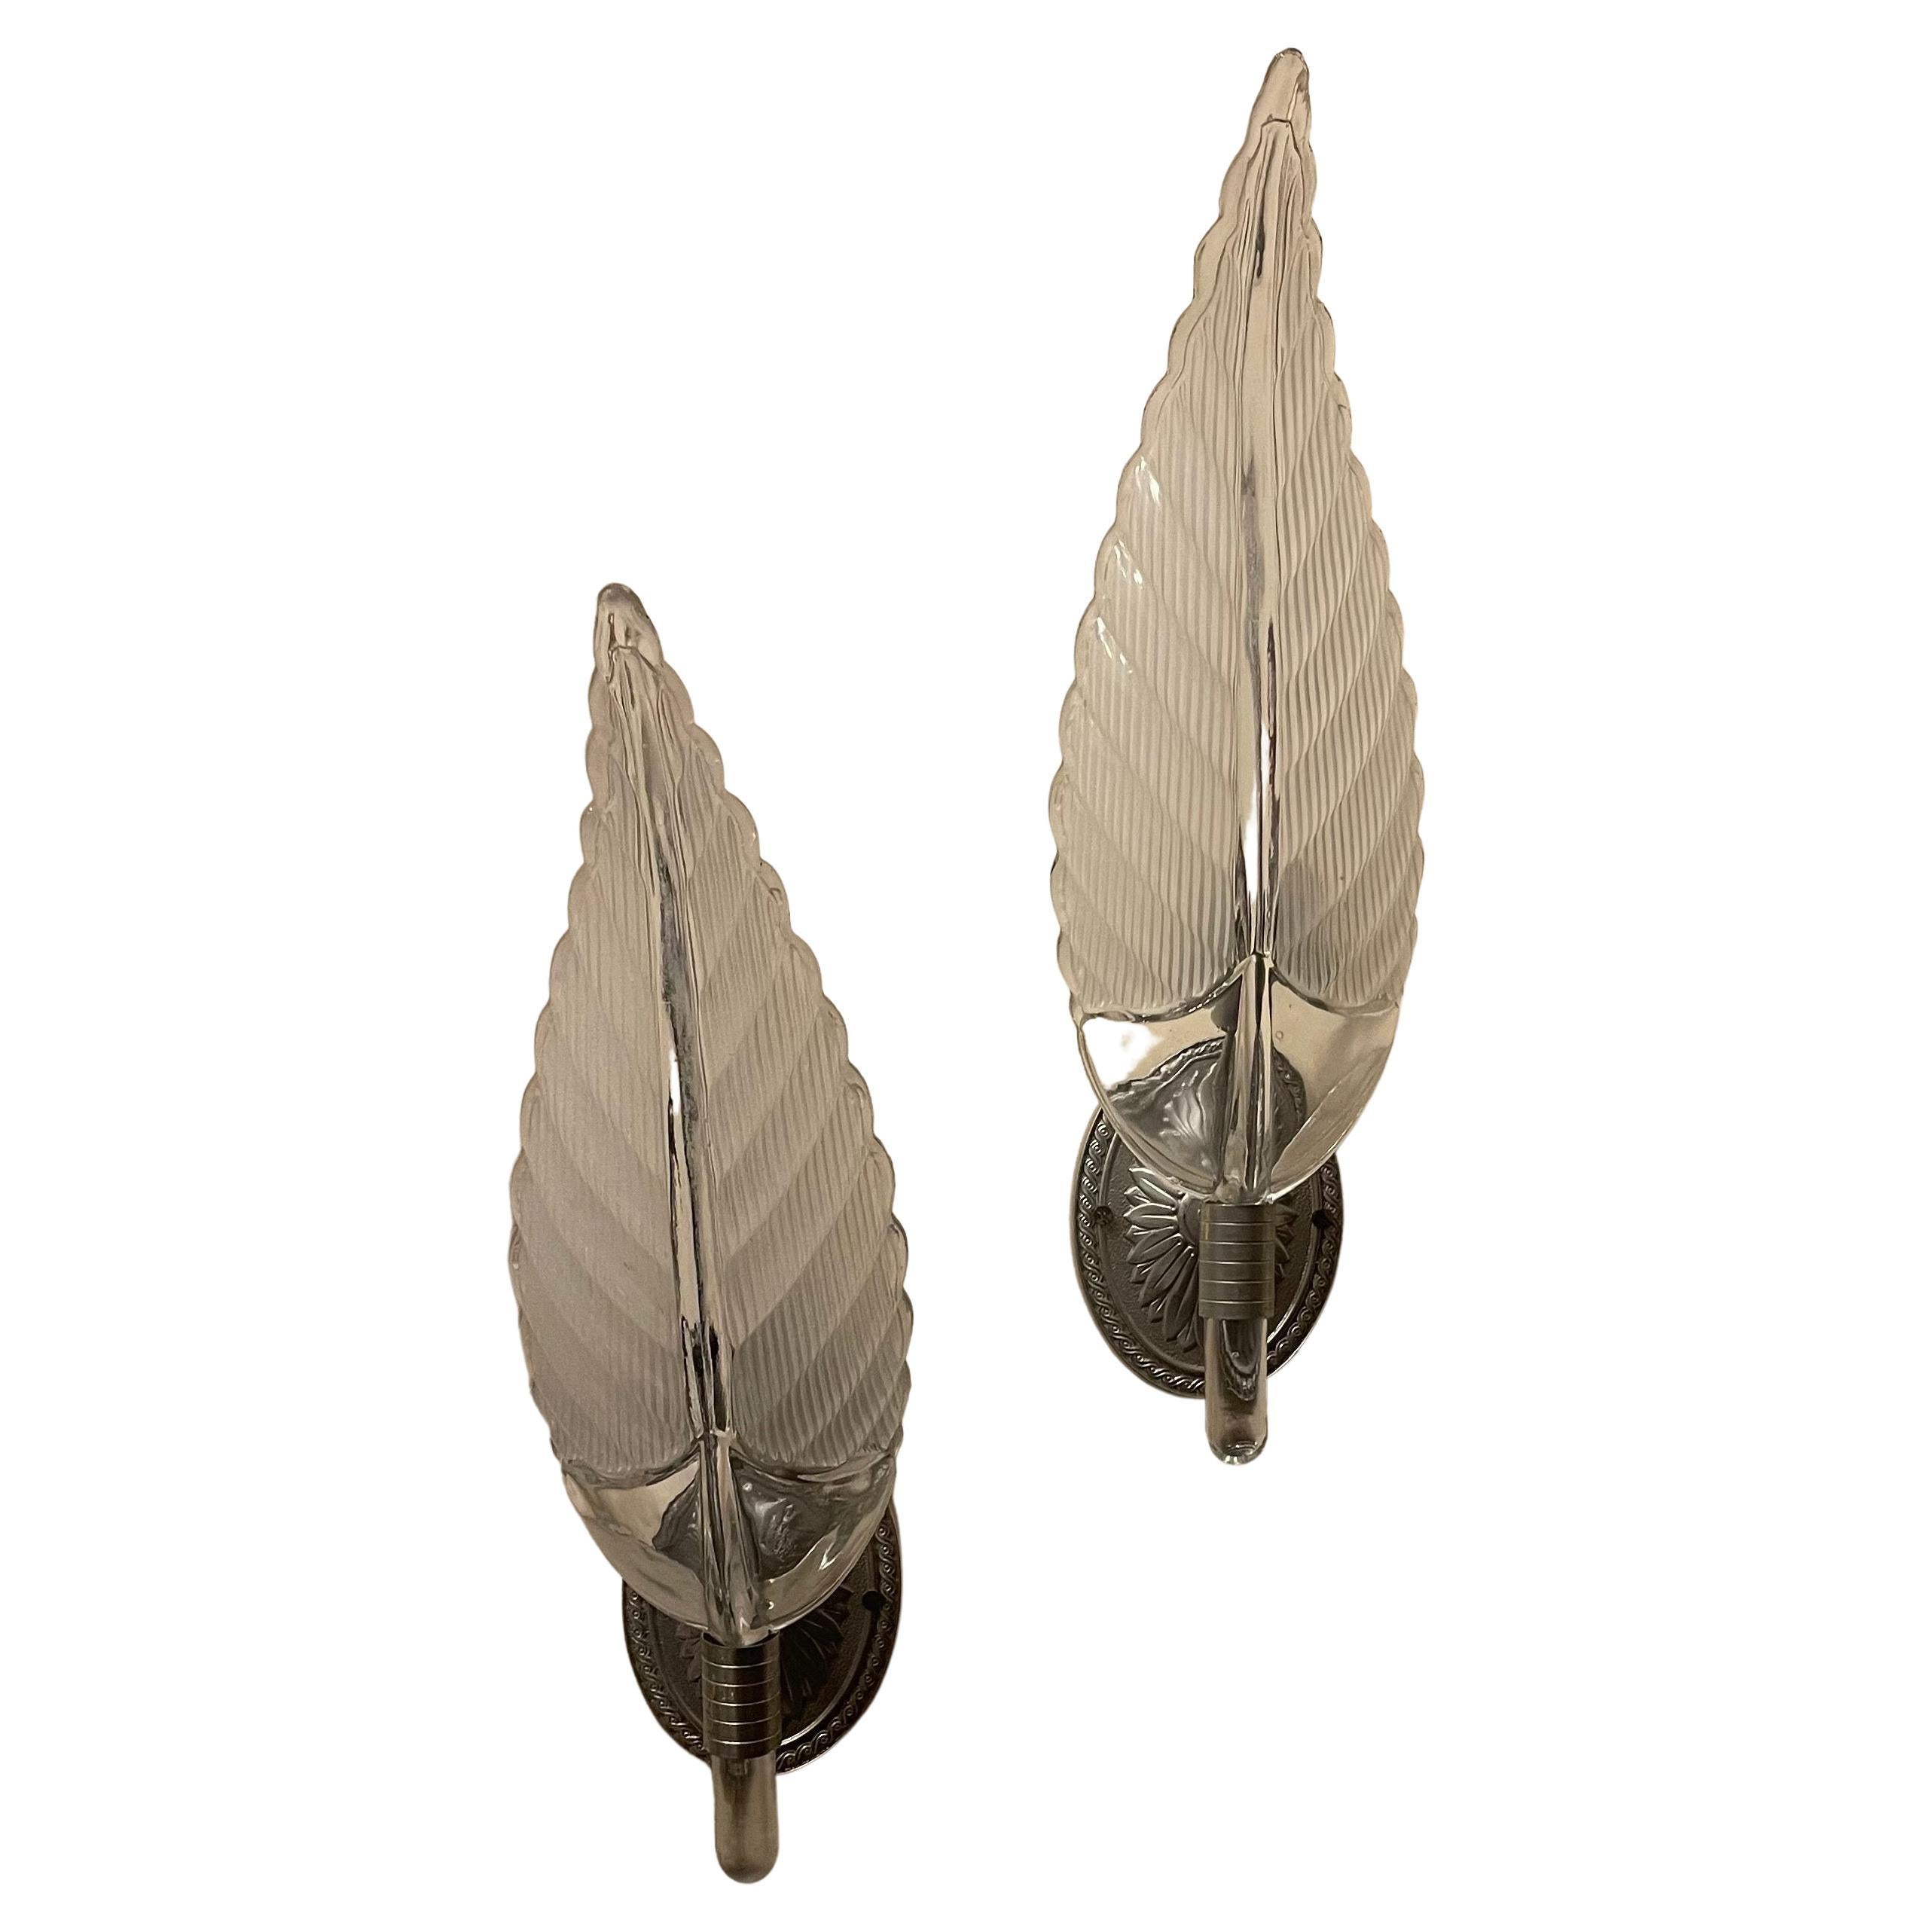 A Wonderful Pair Of Mid Century Modern Murano Sconces In The Manner Of  Barovier & Toso. With A Stunning Glass Shade In The Form Of A Large Leaf Shape And Having An Oval Nickel Plated Back Plate Leading To A Single Candelabra Socket. 